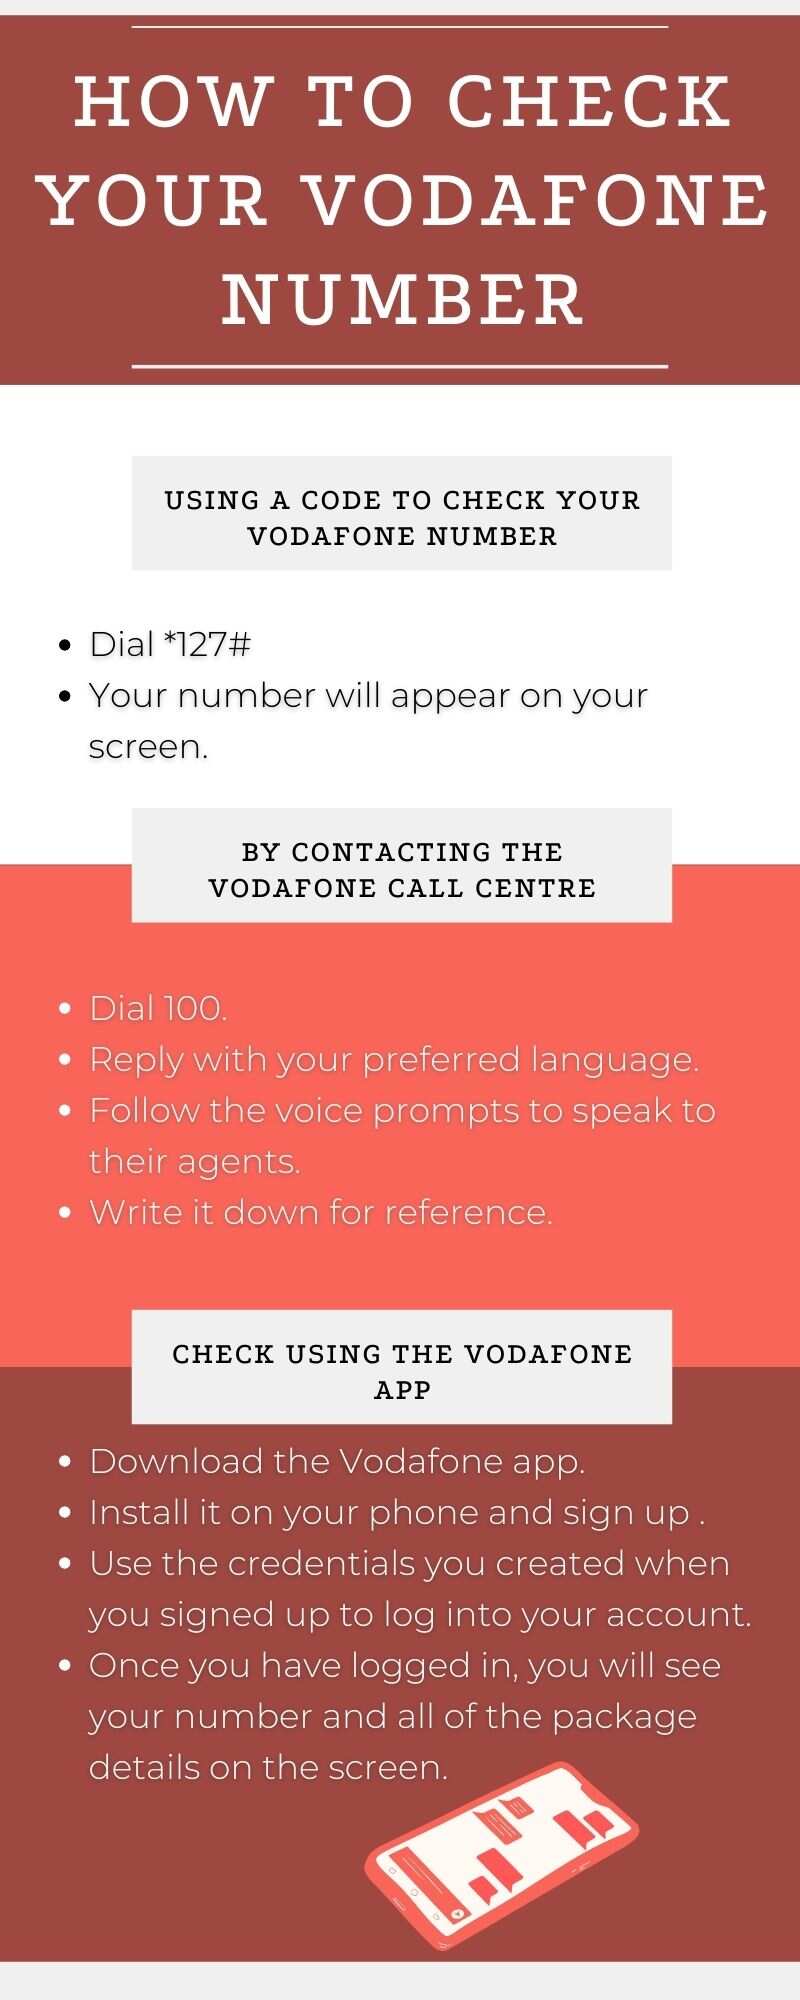 How to check your Vodafone number: step-by-step guide